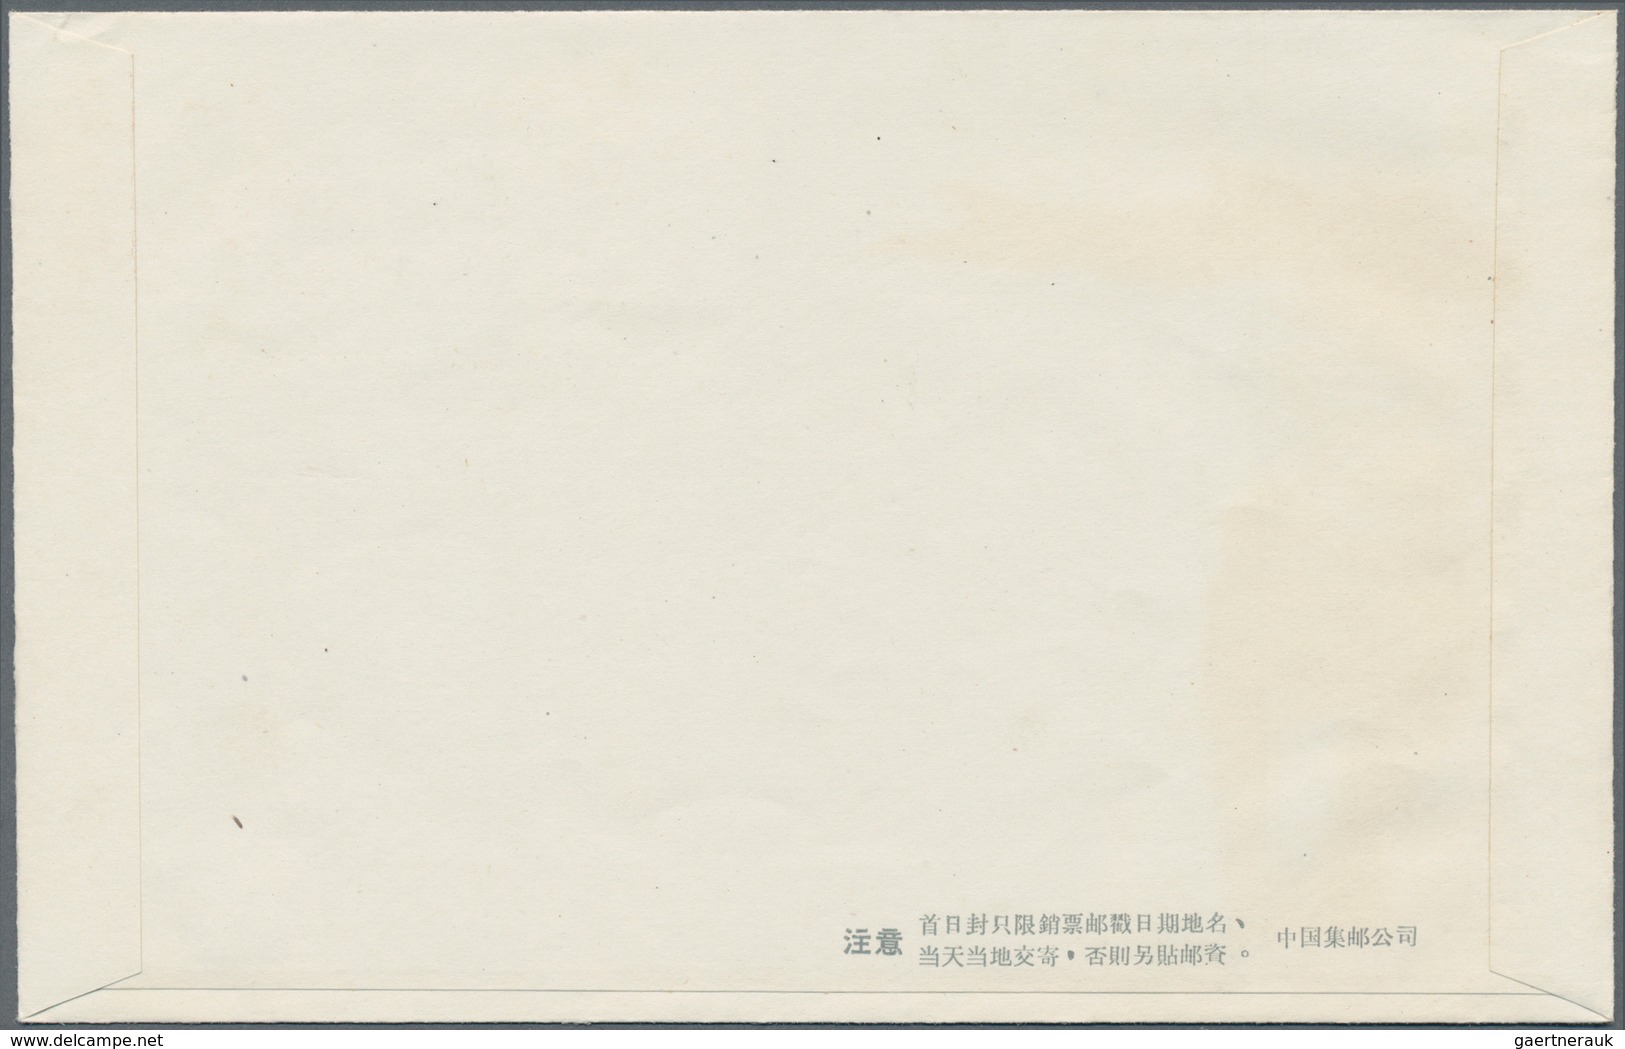 China - Volksrepublik: 1963/64, 6 FDC sets, bearing the full sets of C101, C102, C103, C104, S58, an